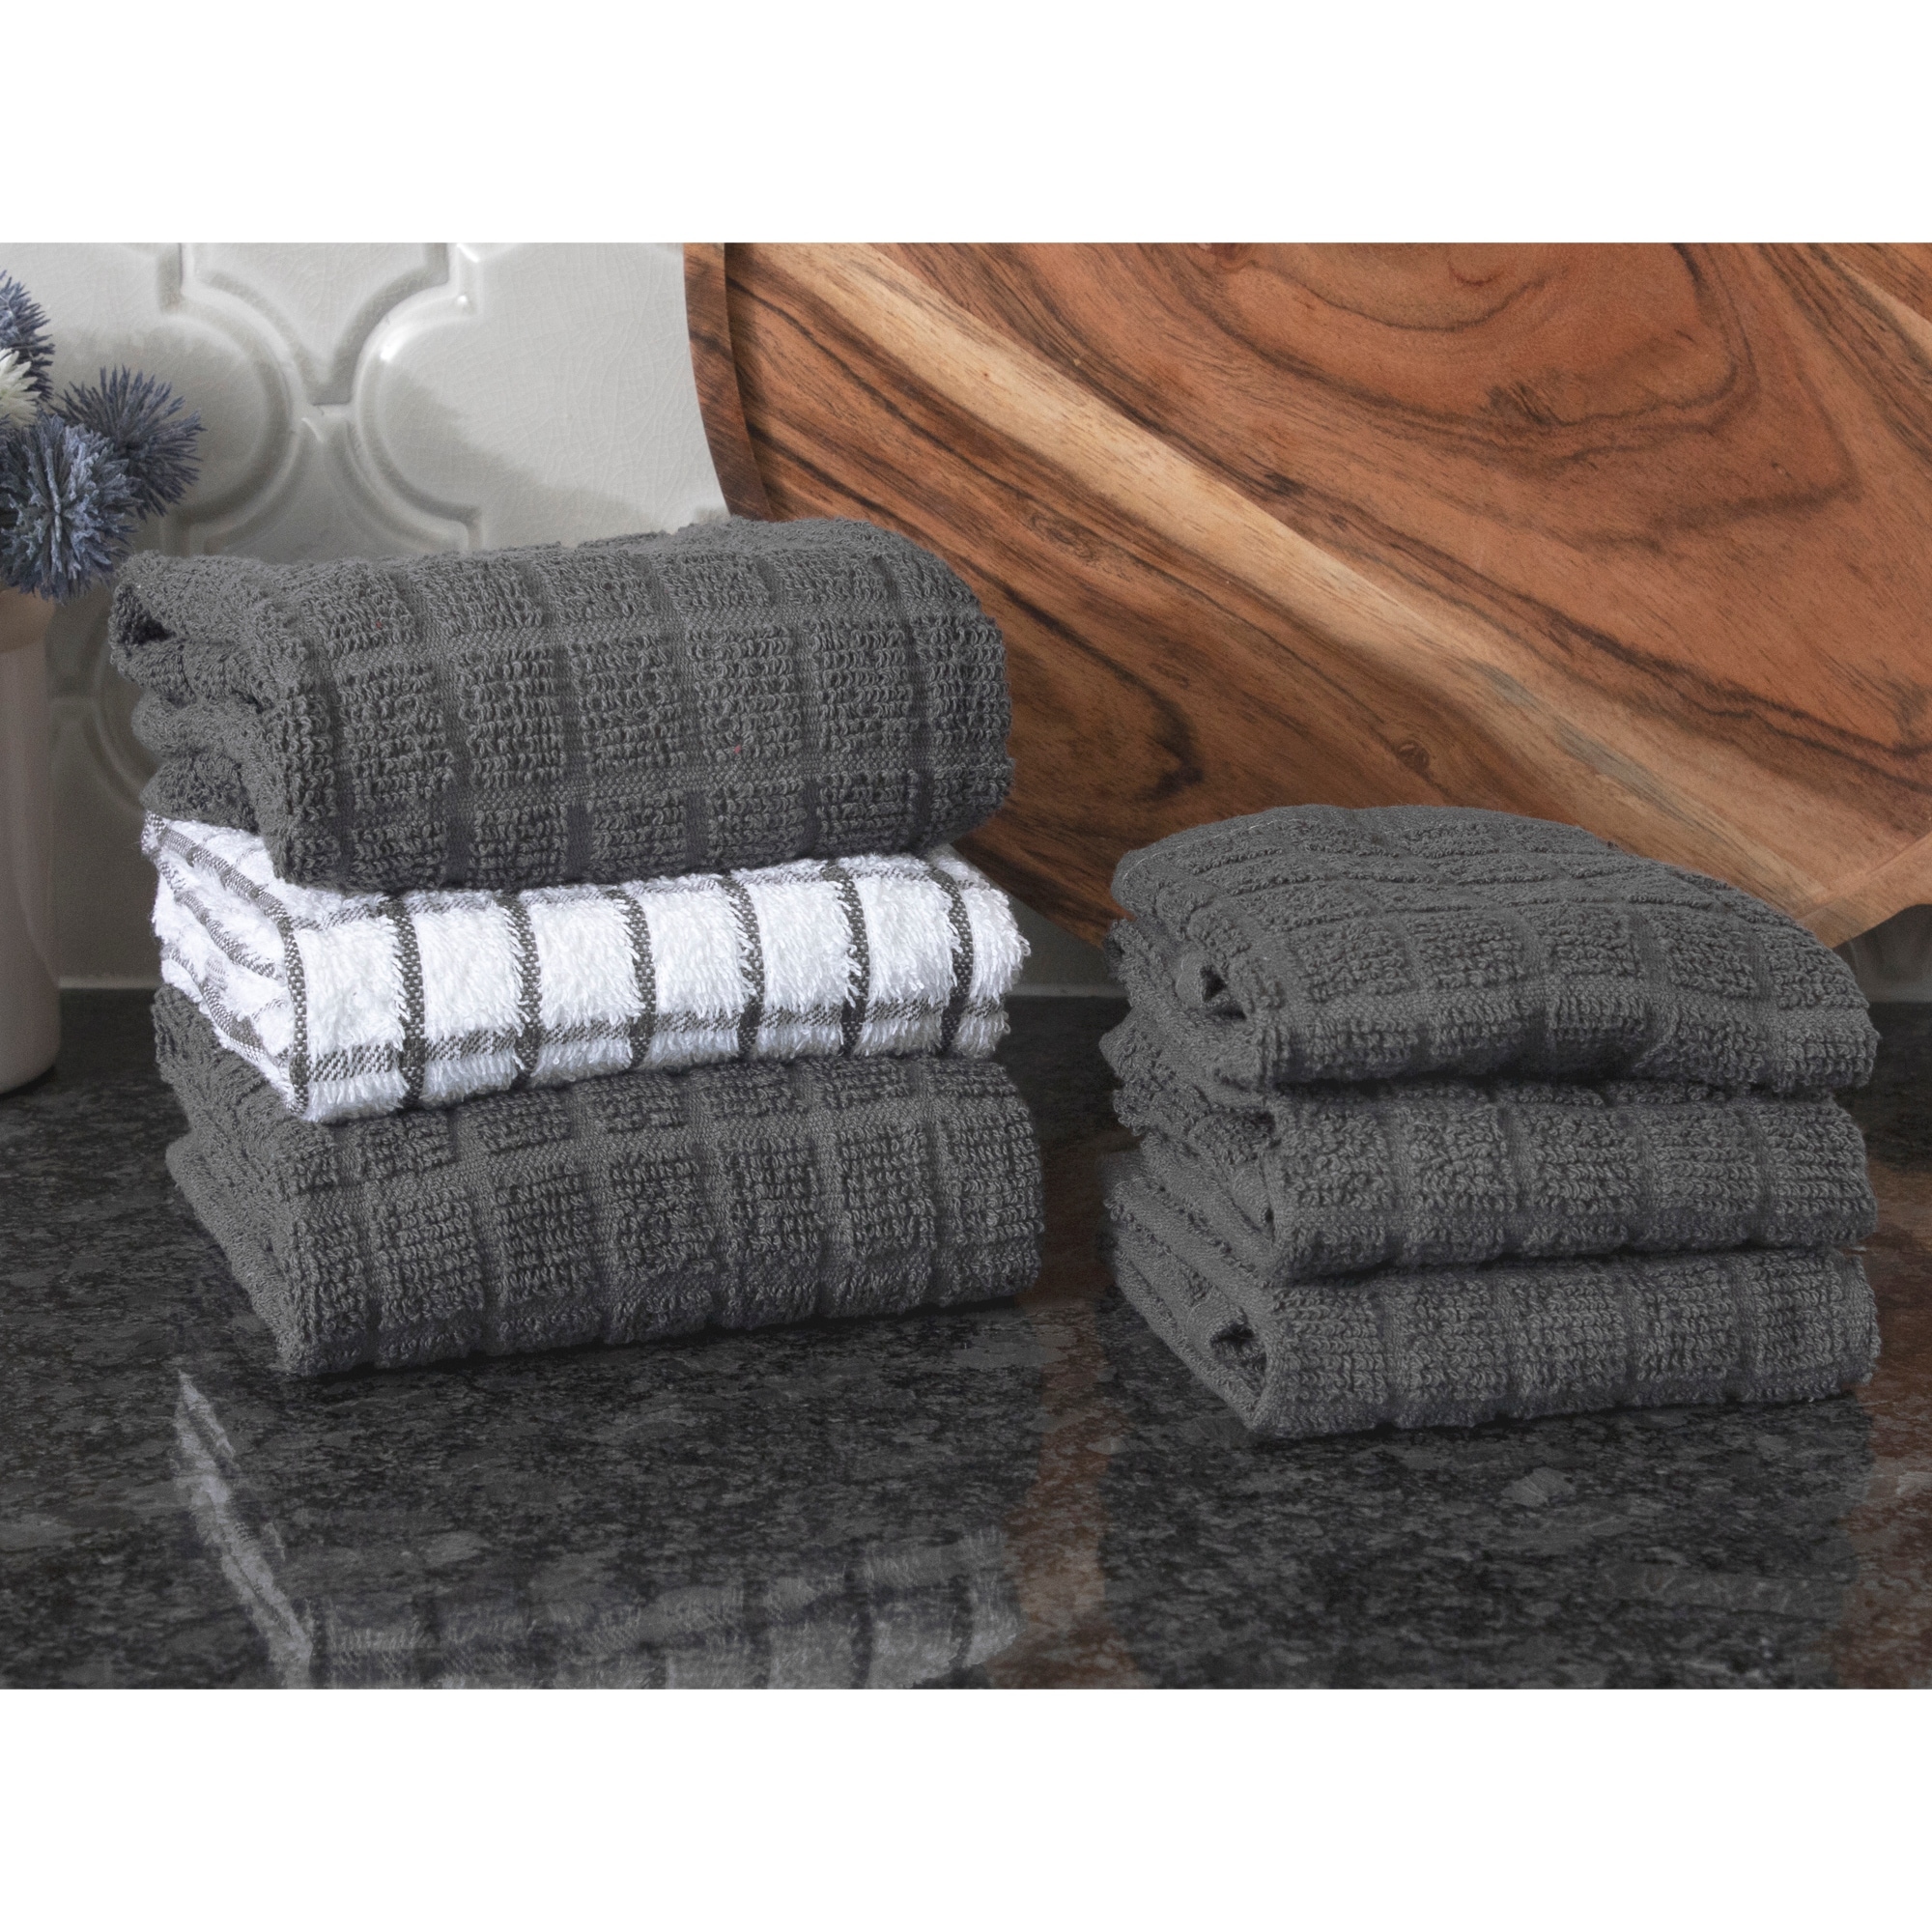 https://ak1.ostkcdn.com/images/products/is/images/direct/1ef95531dc8cff05483fe7f58c9371d214246eae/RITZ-Terry-Kitchen-Towel-and-Dish-Cloth%2C-Set-of-3-Towels-and-3-Dish-Cloths.jpg